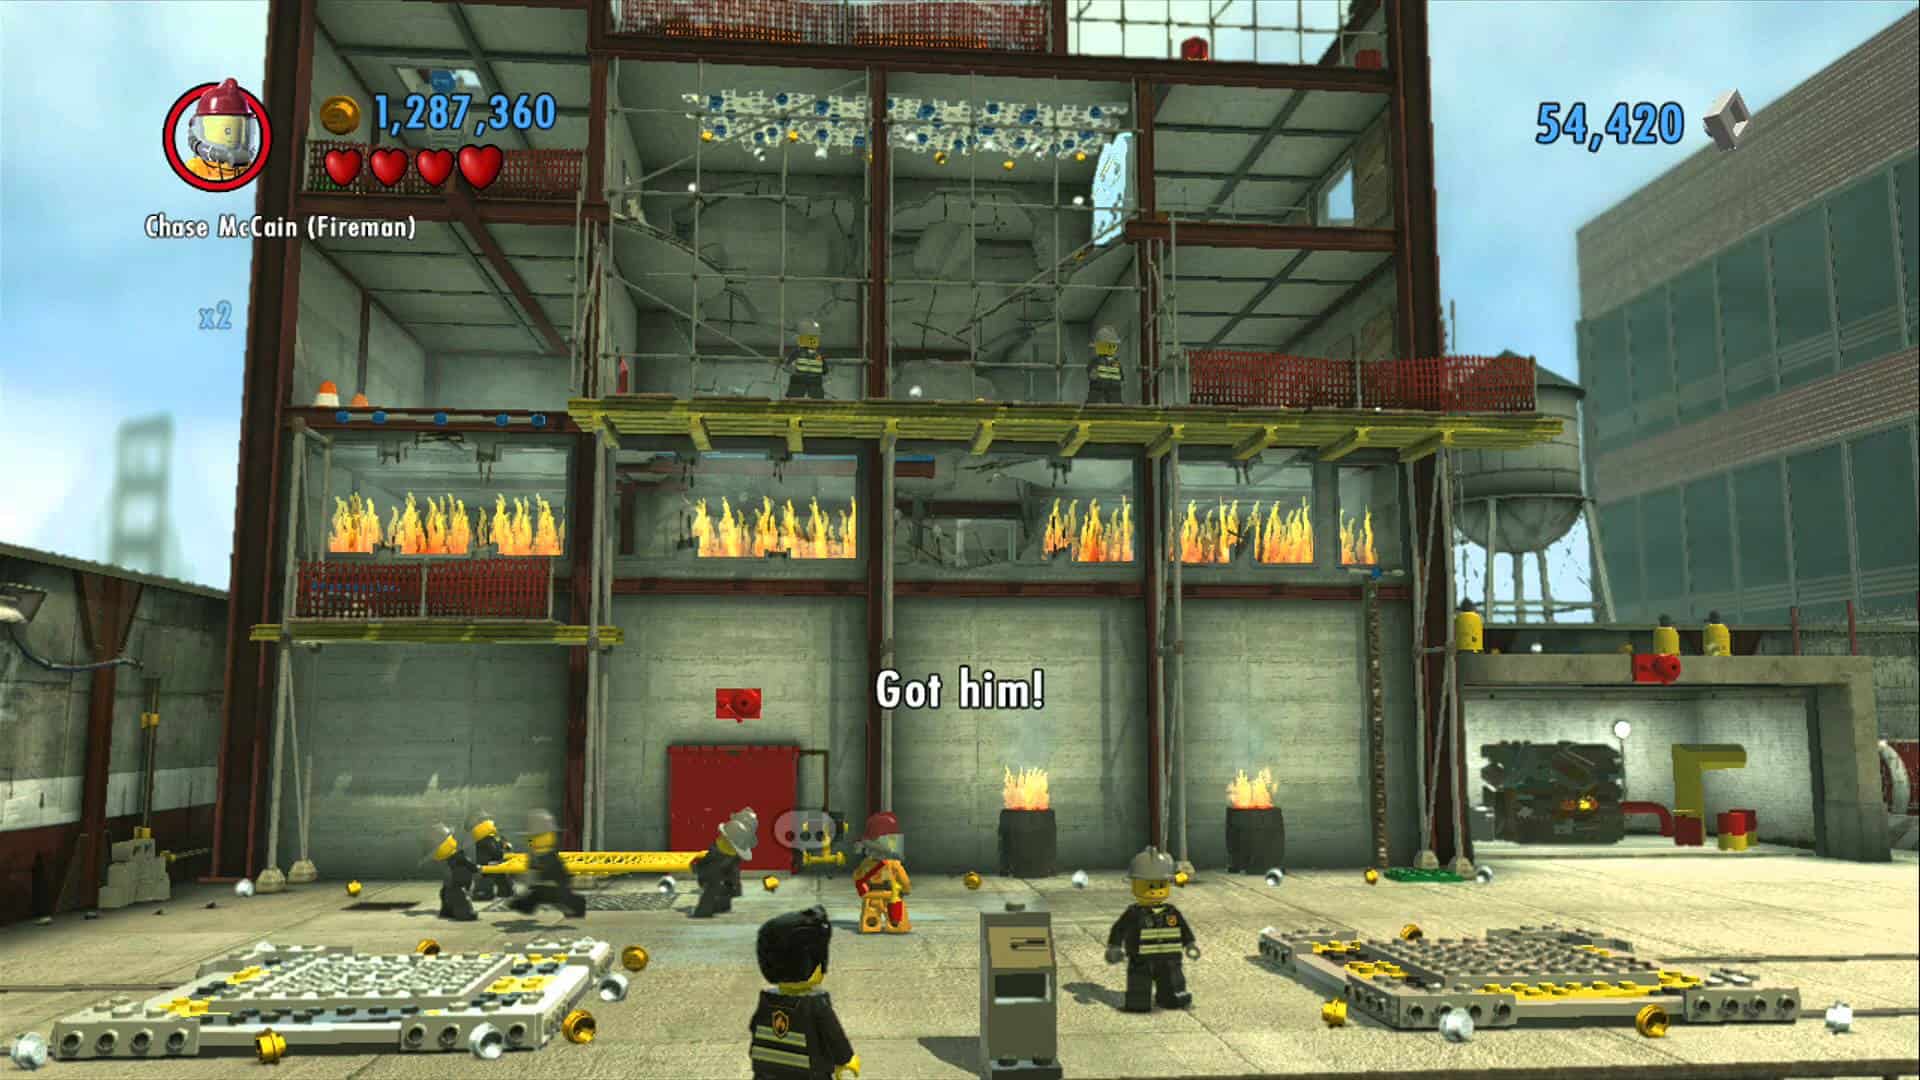 lego city undercover computer game